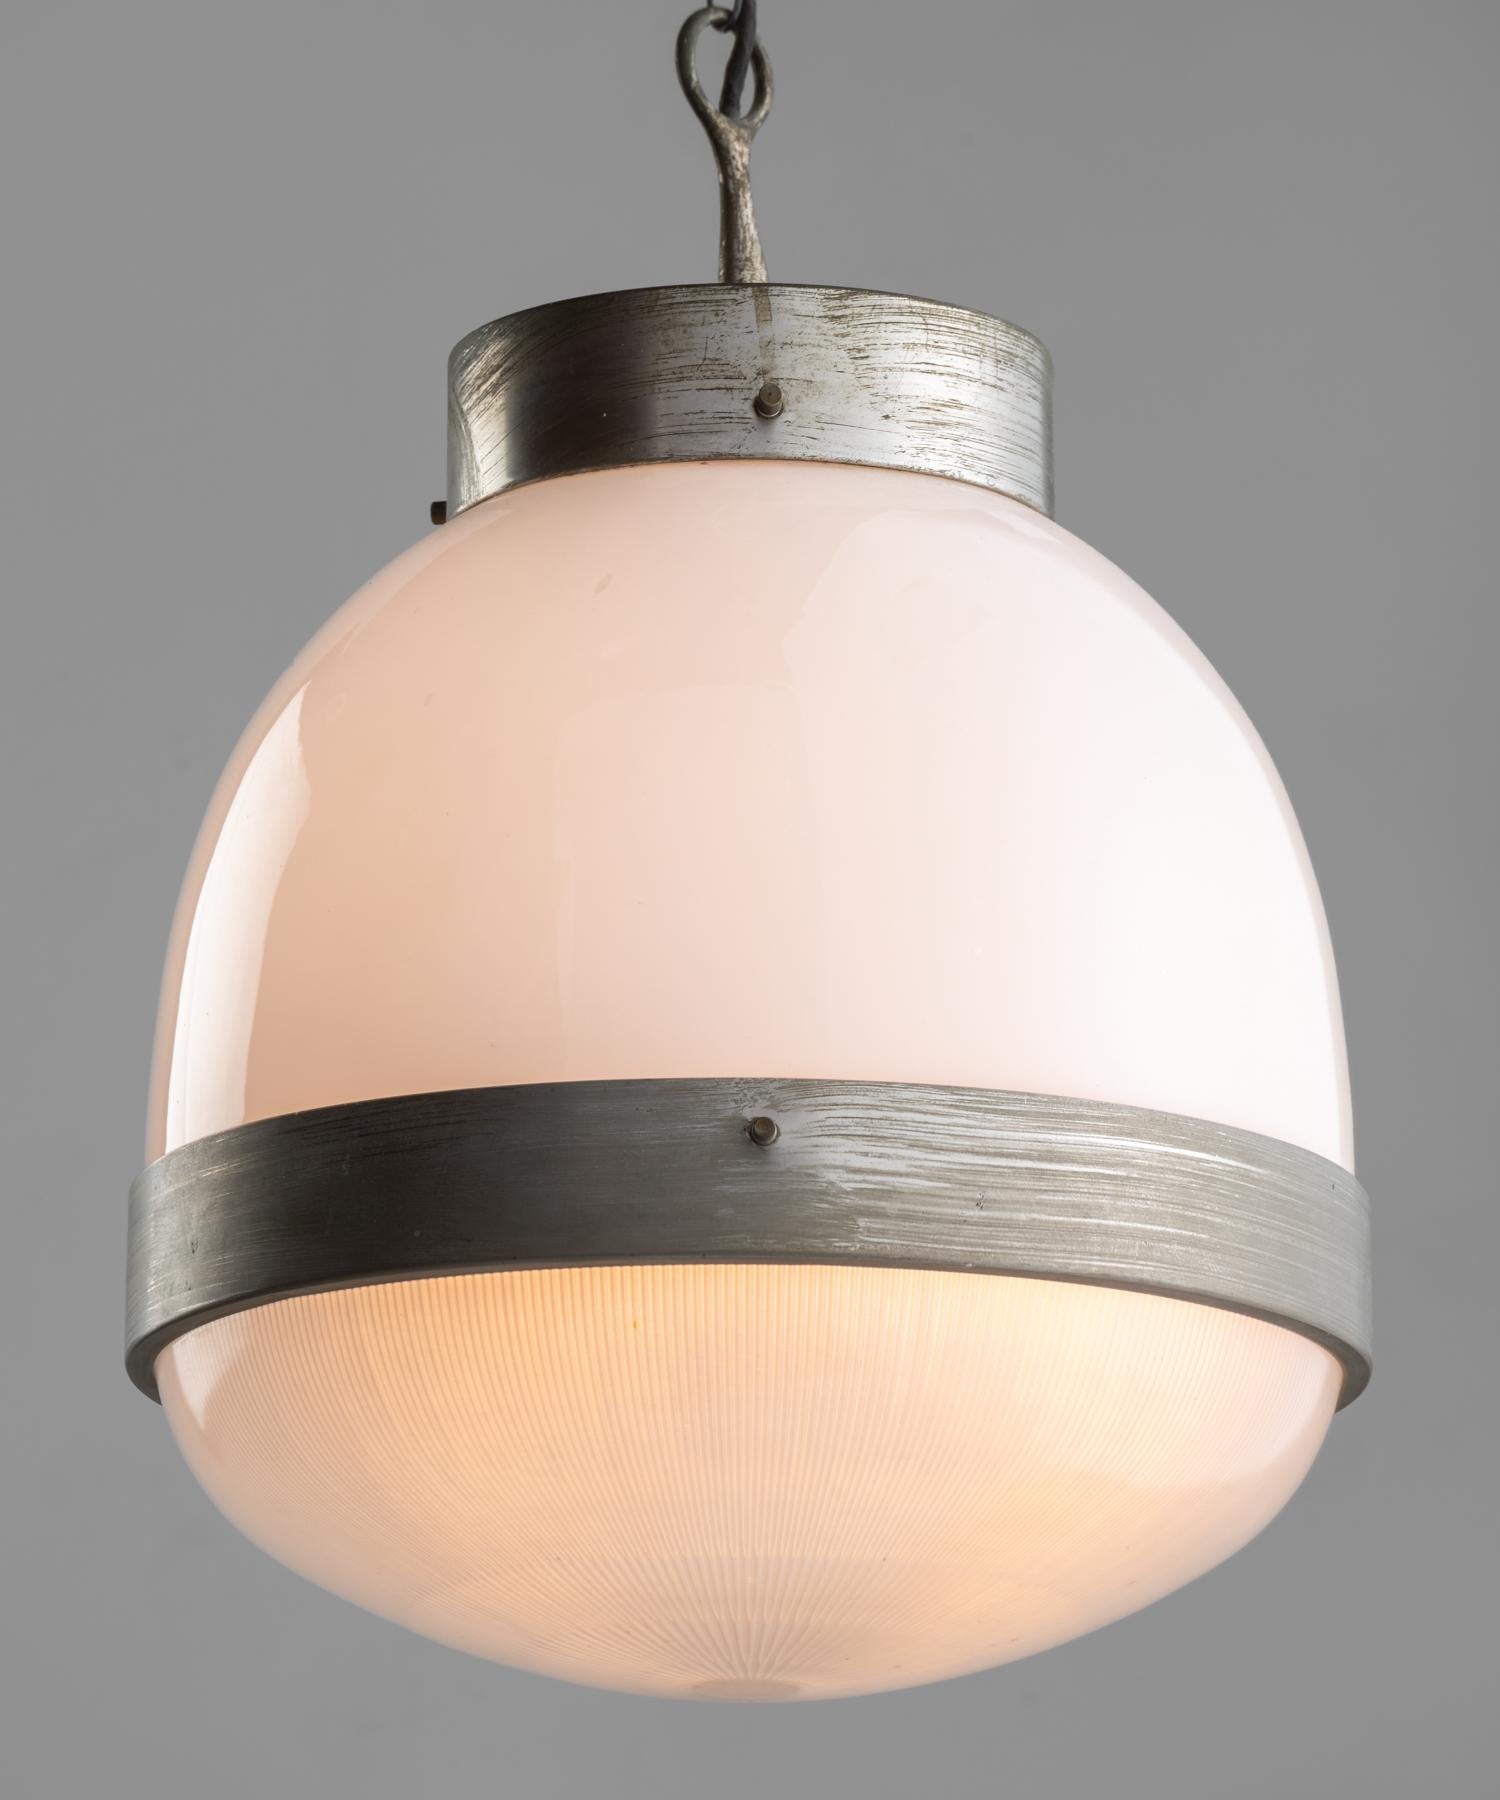 “Big Delta” pendant by Sergio Mazza for Artemide, Italy, circa 1960.

Two part shade, with opaline on top and holophane on bottom secured with brass hardware.

Measures: 13.75